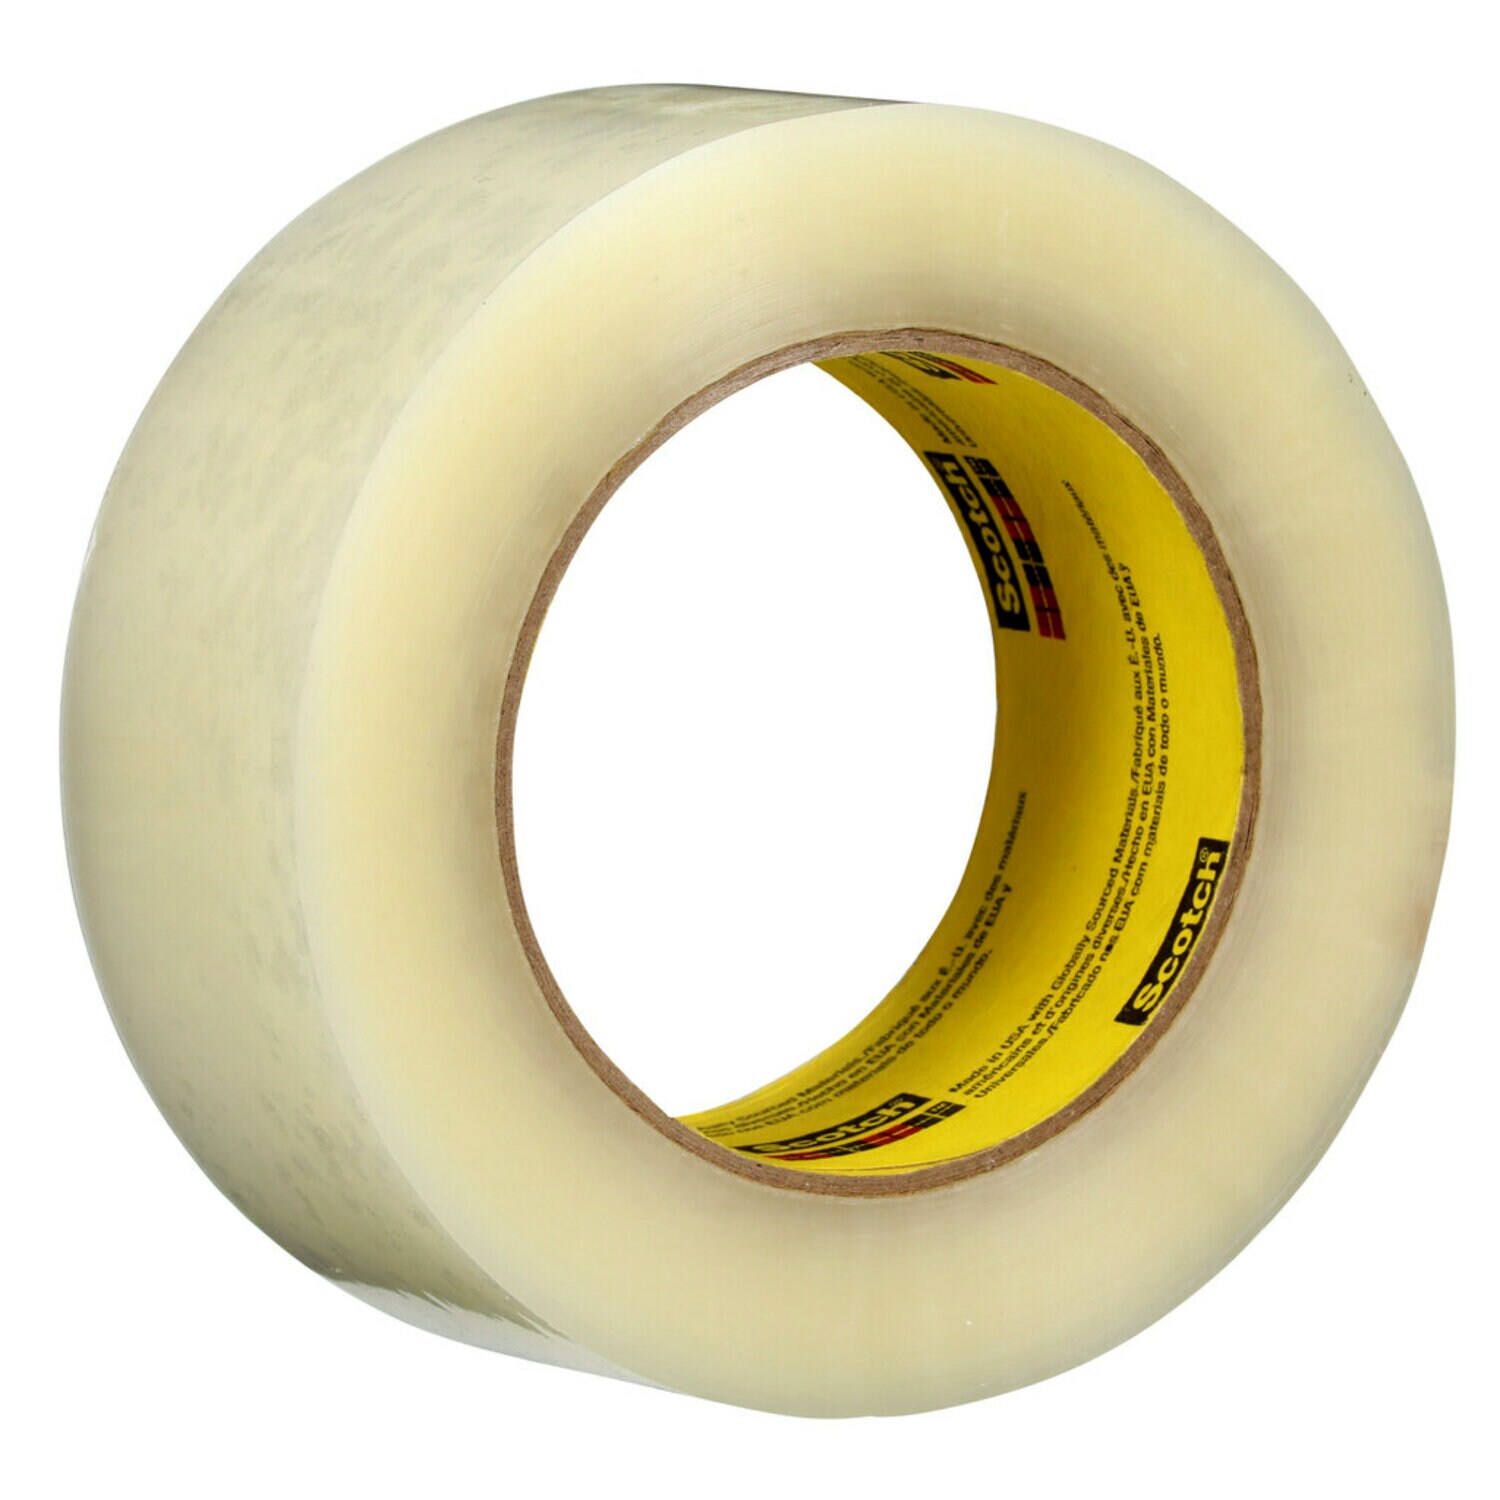 7100291774 - Scotch High Tack Box Sealing Tape 373+, Clear, 48 mm x 100 m, 36 Rolls/Case, Individually Wrapped